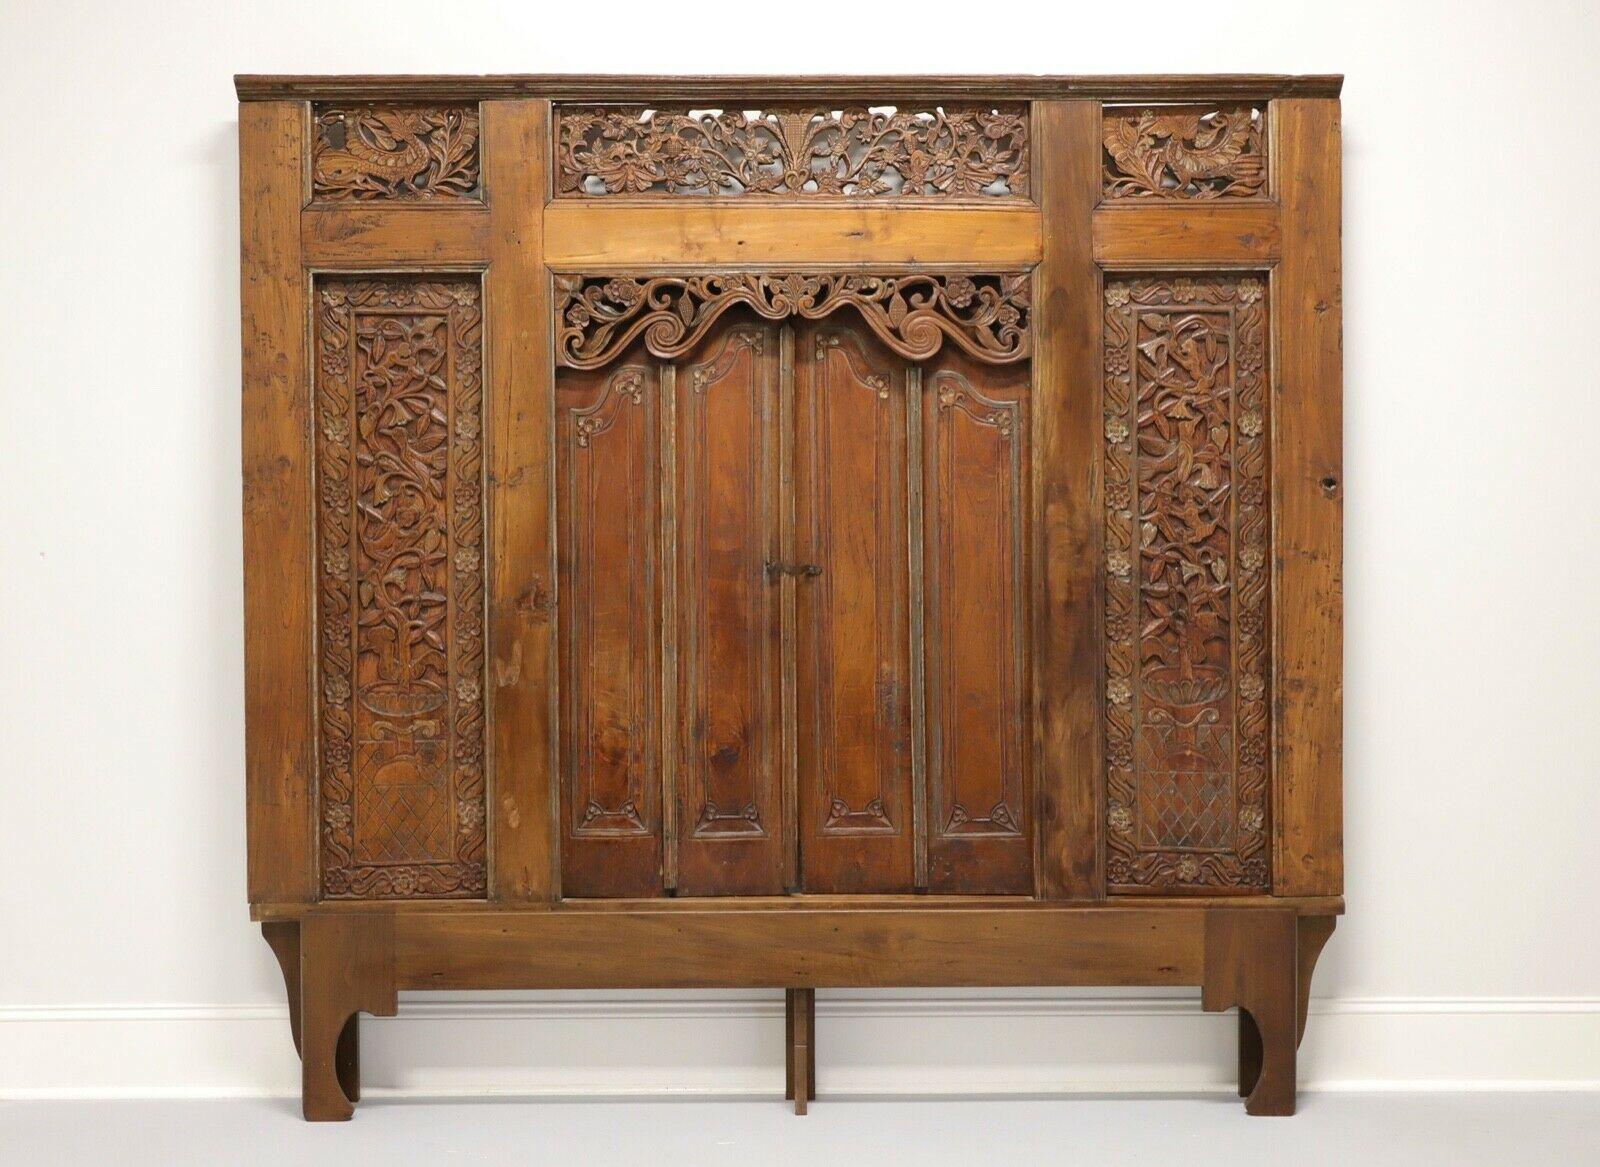 Antique Thai Carved Panel with Doors - Use as Headboard, Room Divider, Wall Art 7